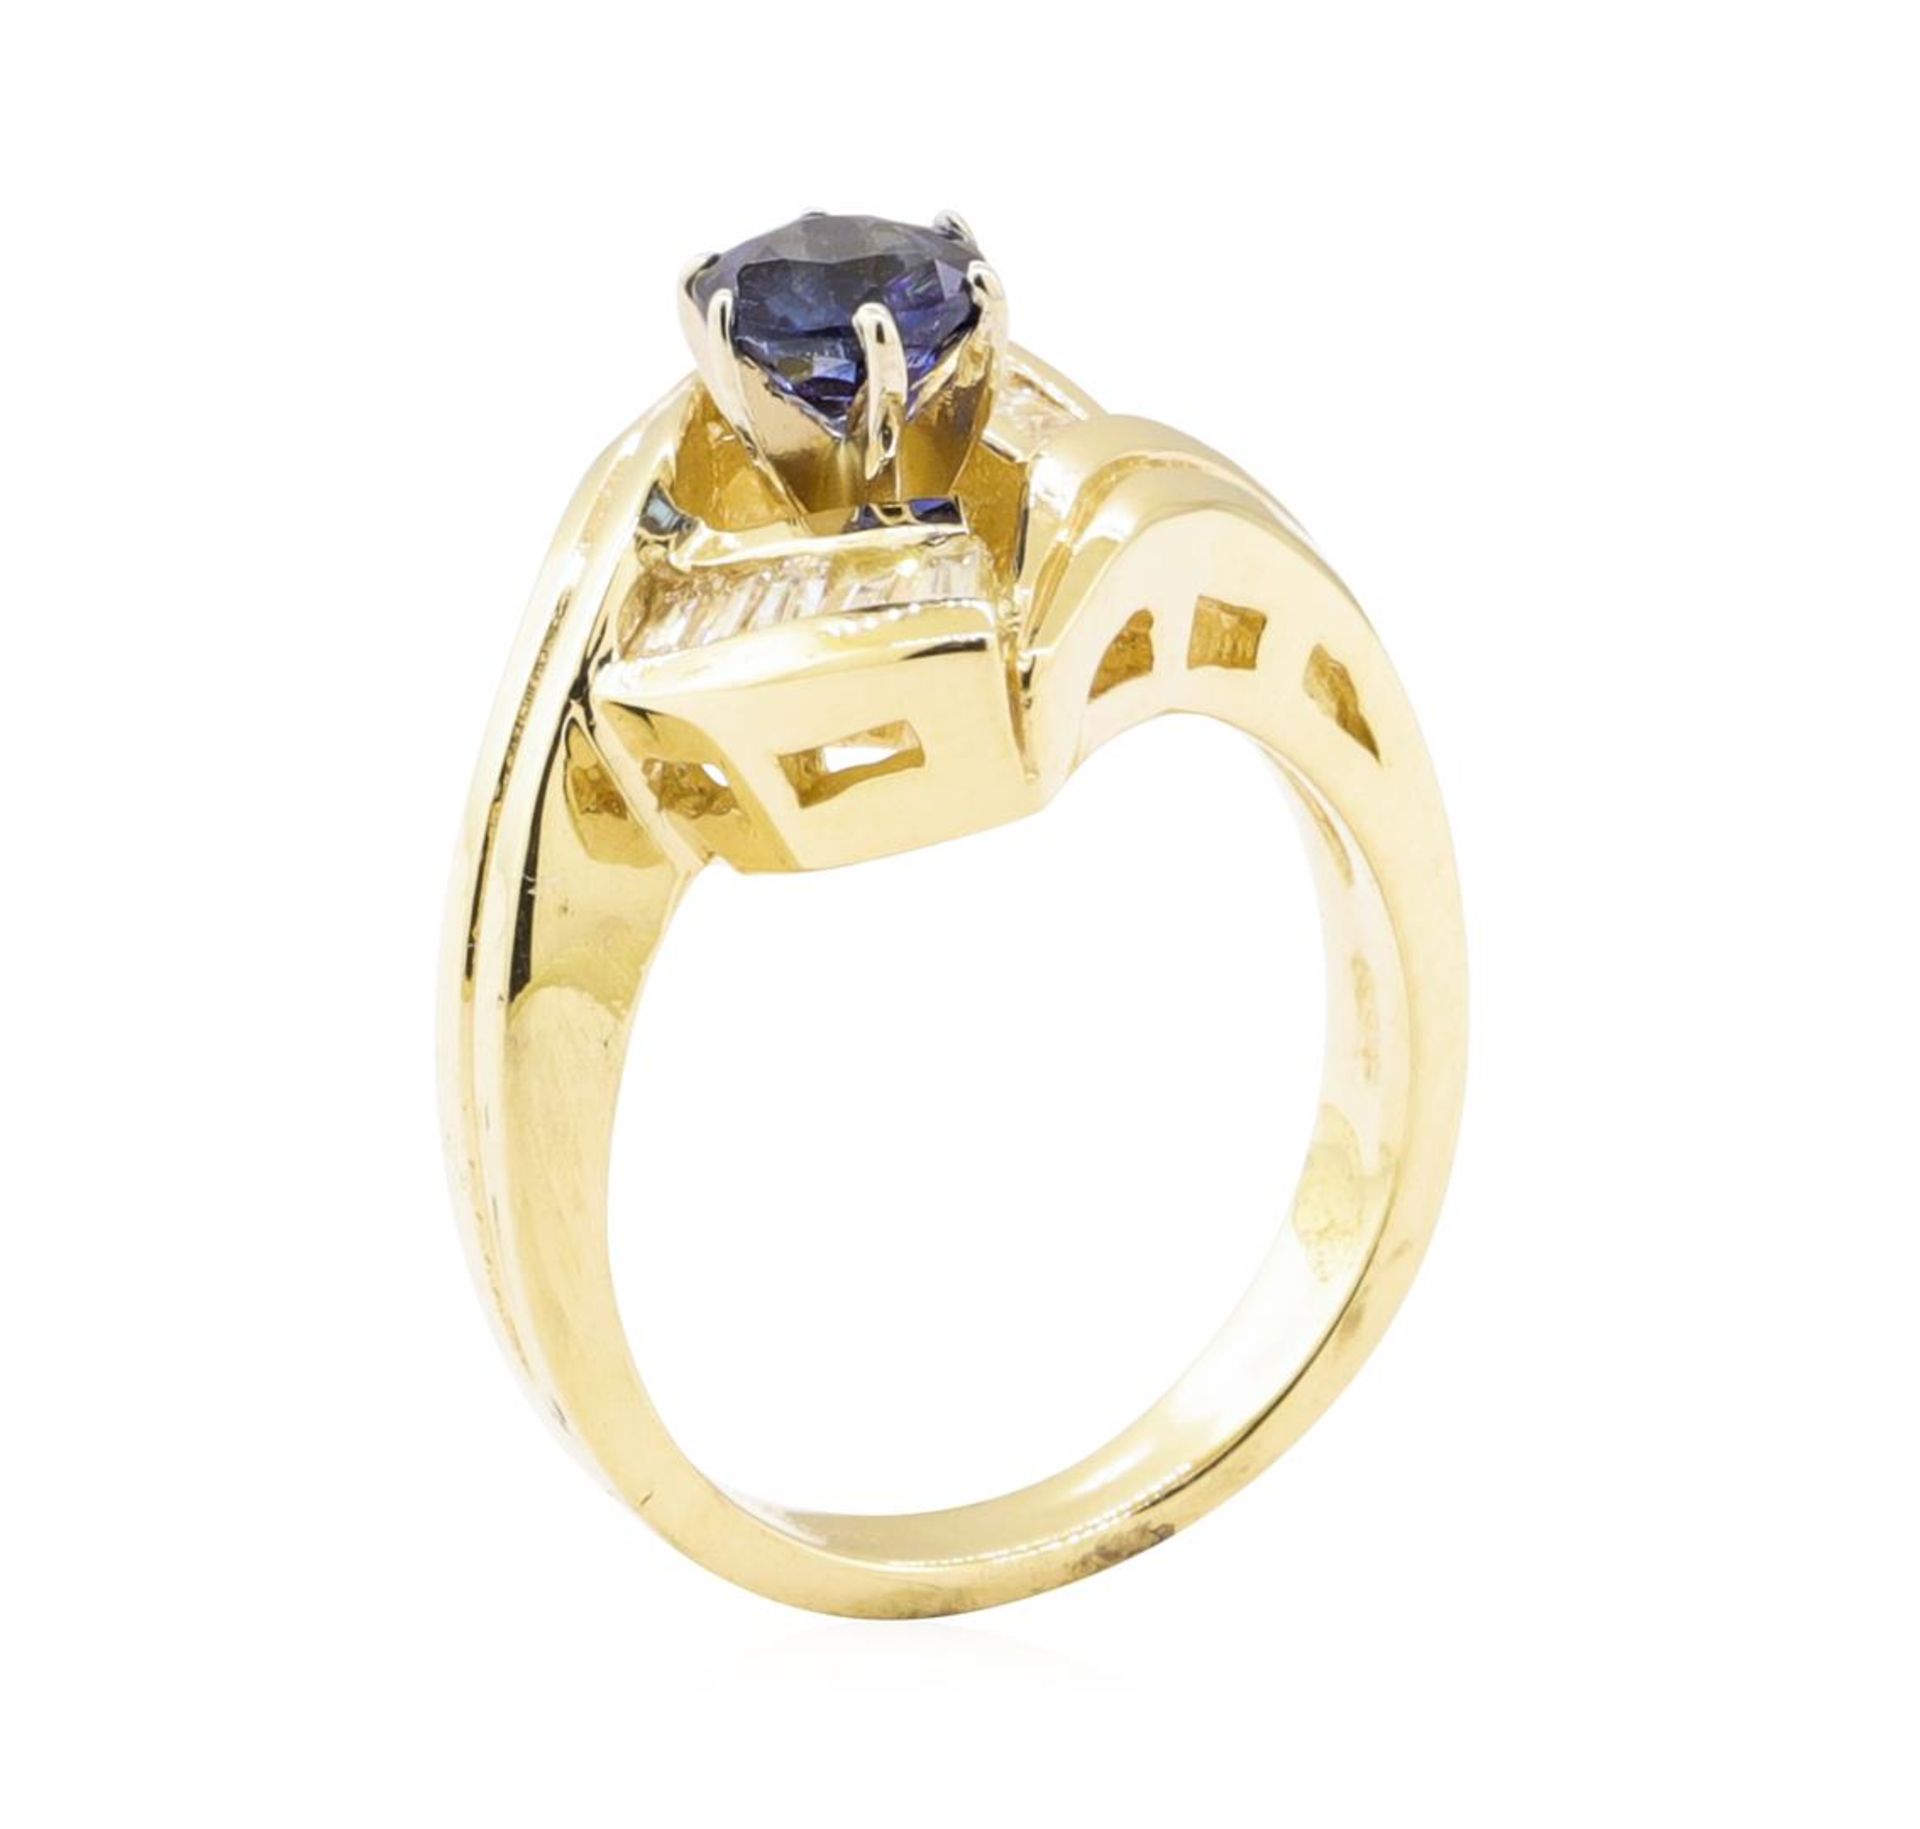 1.05 ctw Blue Sapphire And Diamond Ring - 14KT Yellow Gold - Image 4 of 5